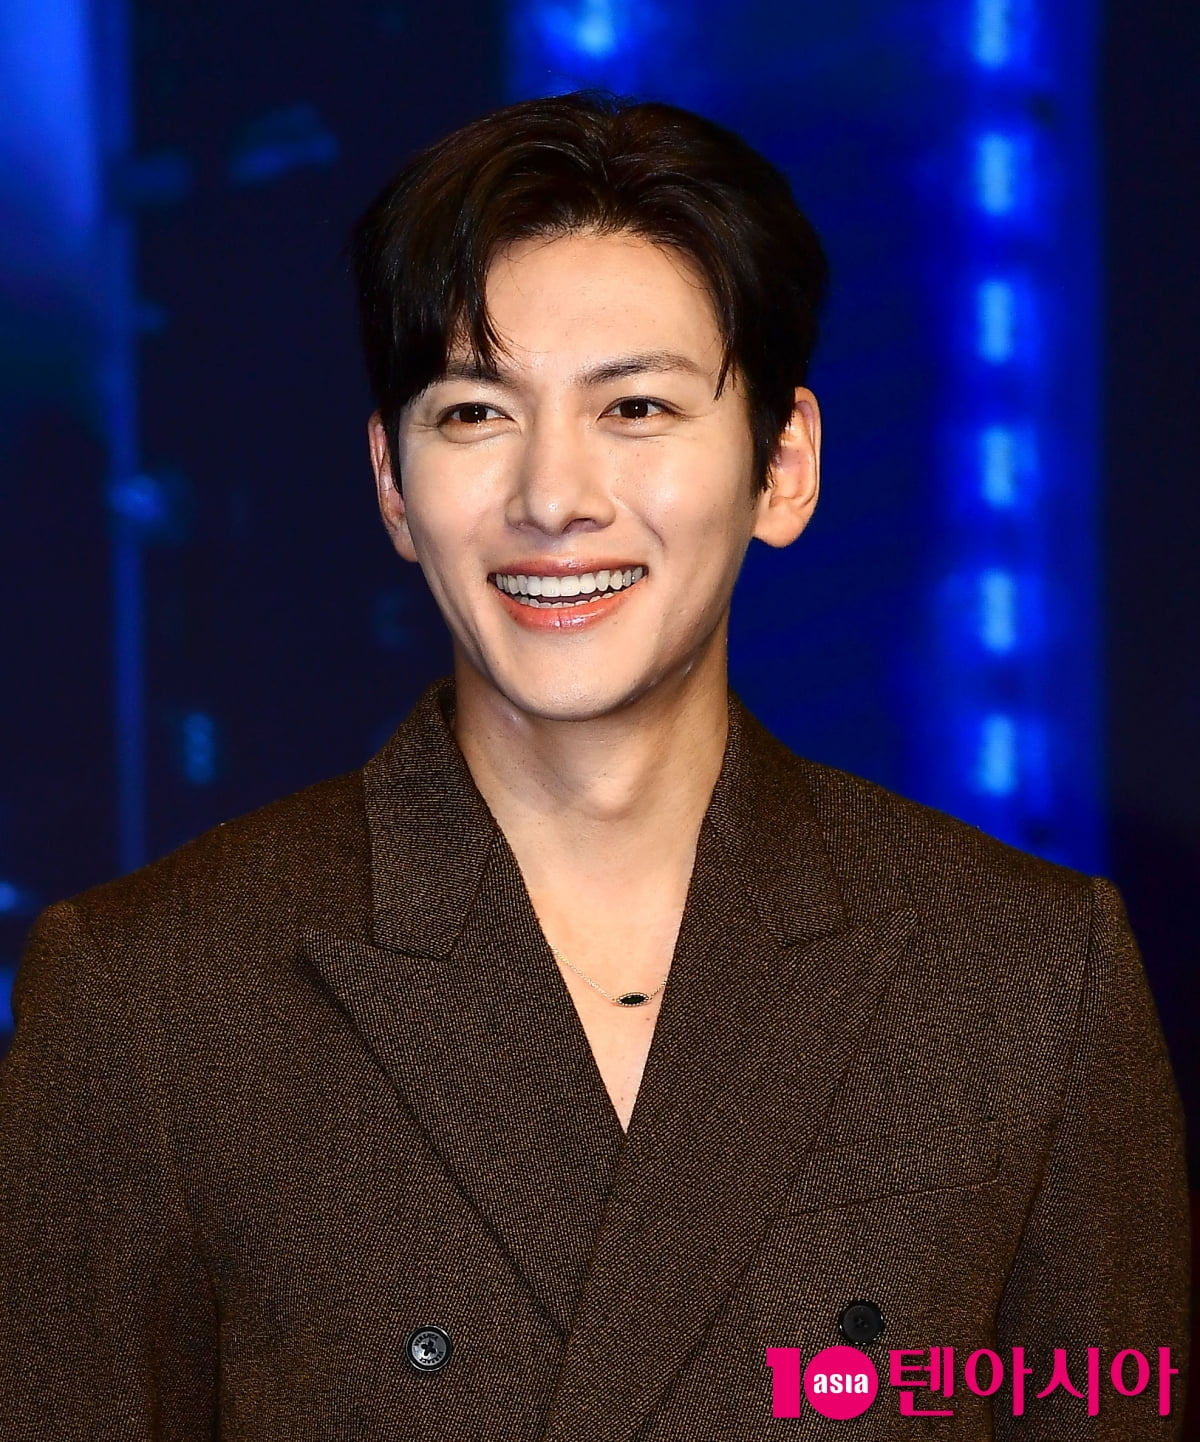 Ji Chang-wook's final decision to appear in the drama 'Fine'... Production will likely be pushed back to next year.